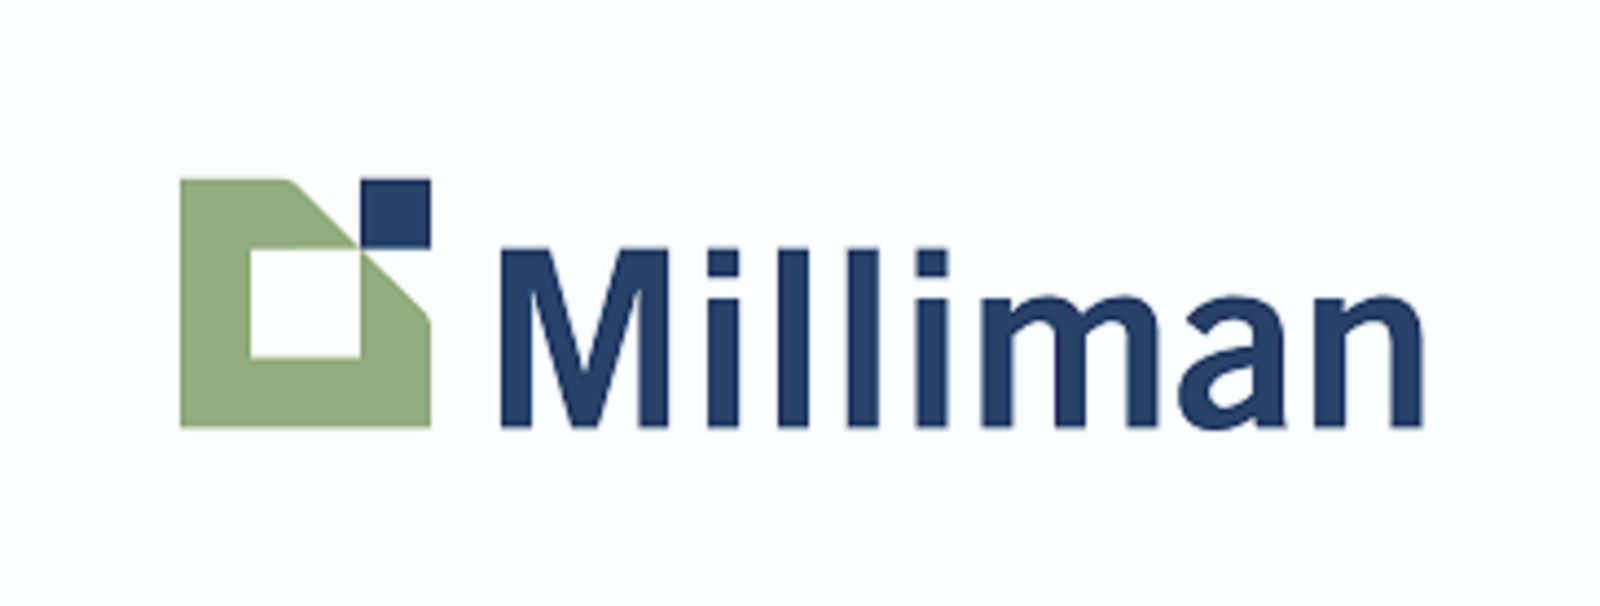 Milliman Off Campus Drive